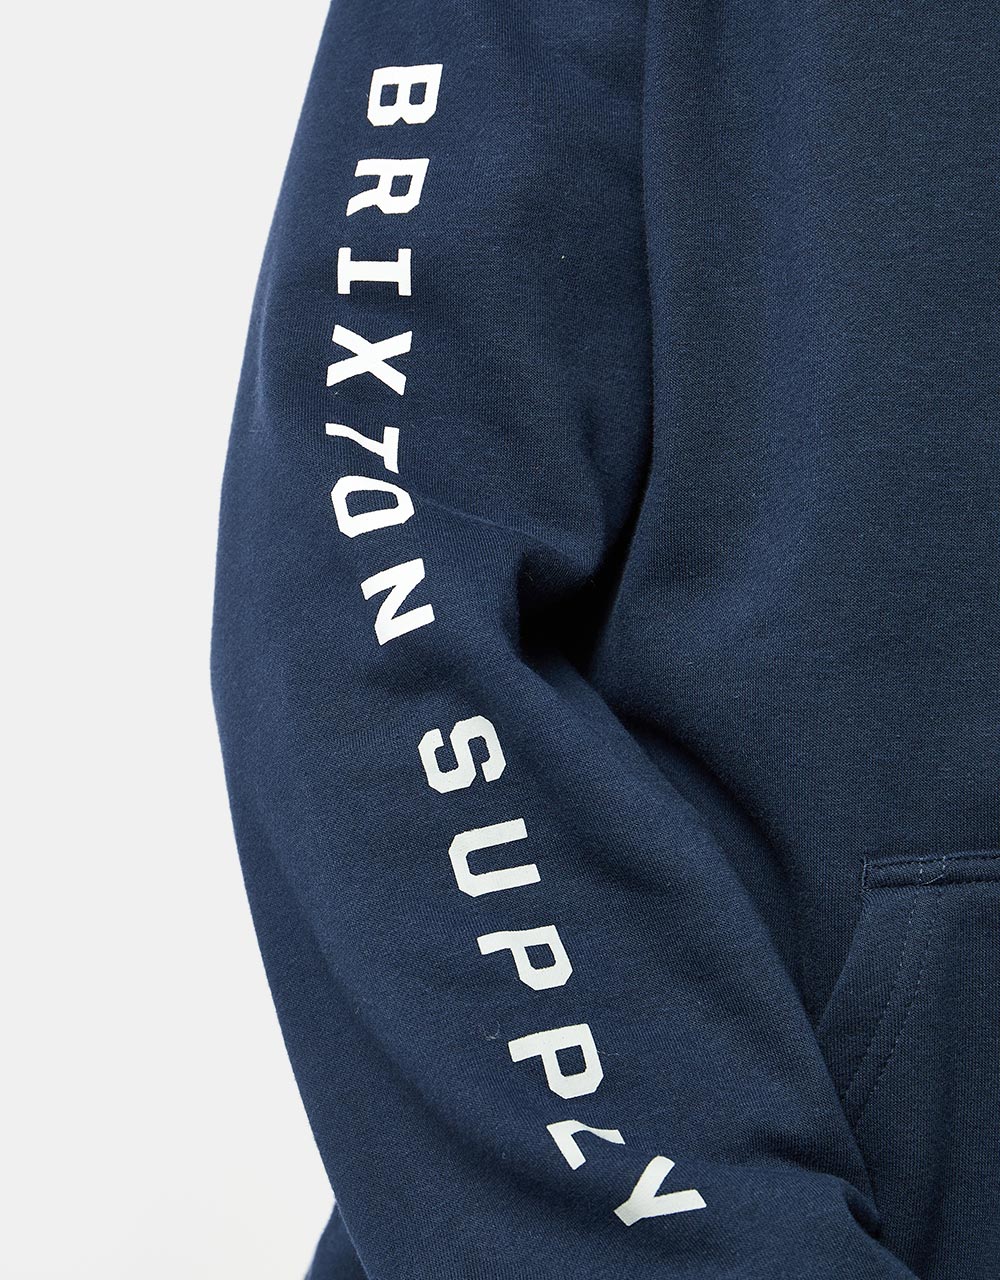 Brixton Crest Pullover Hoodie - Washed Navy/White/Mineral Grey